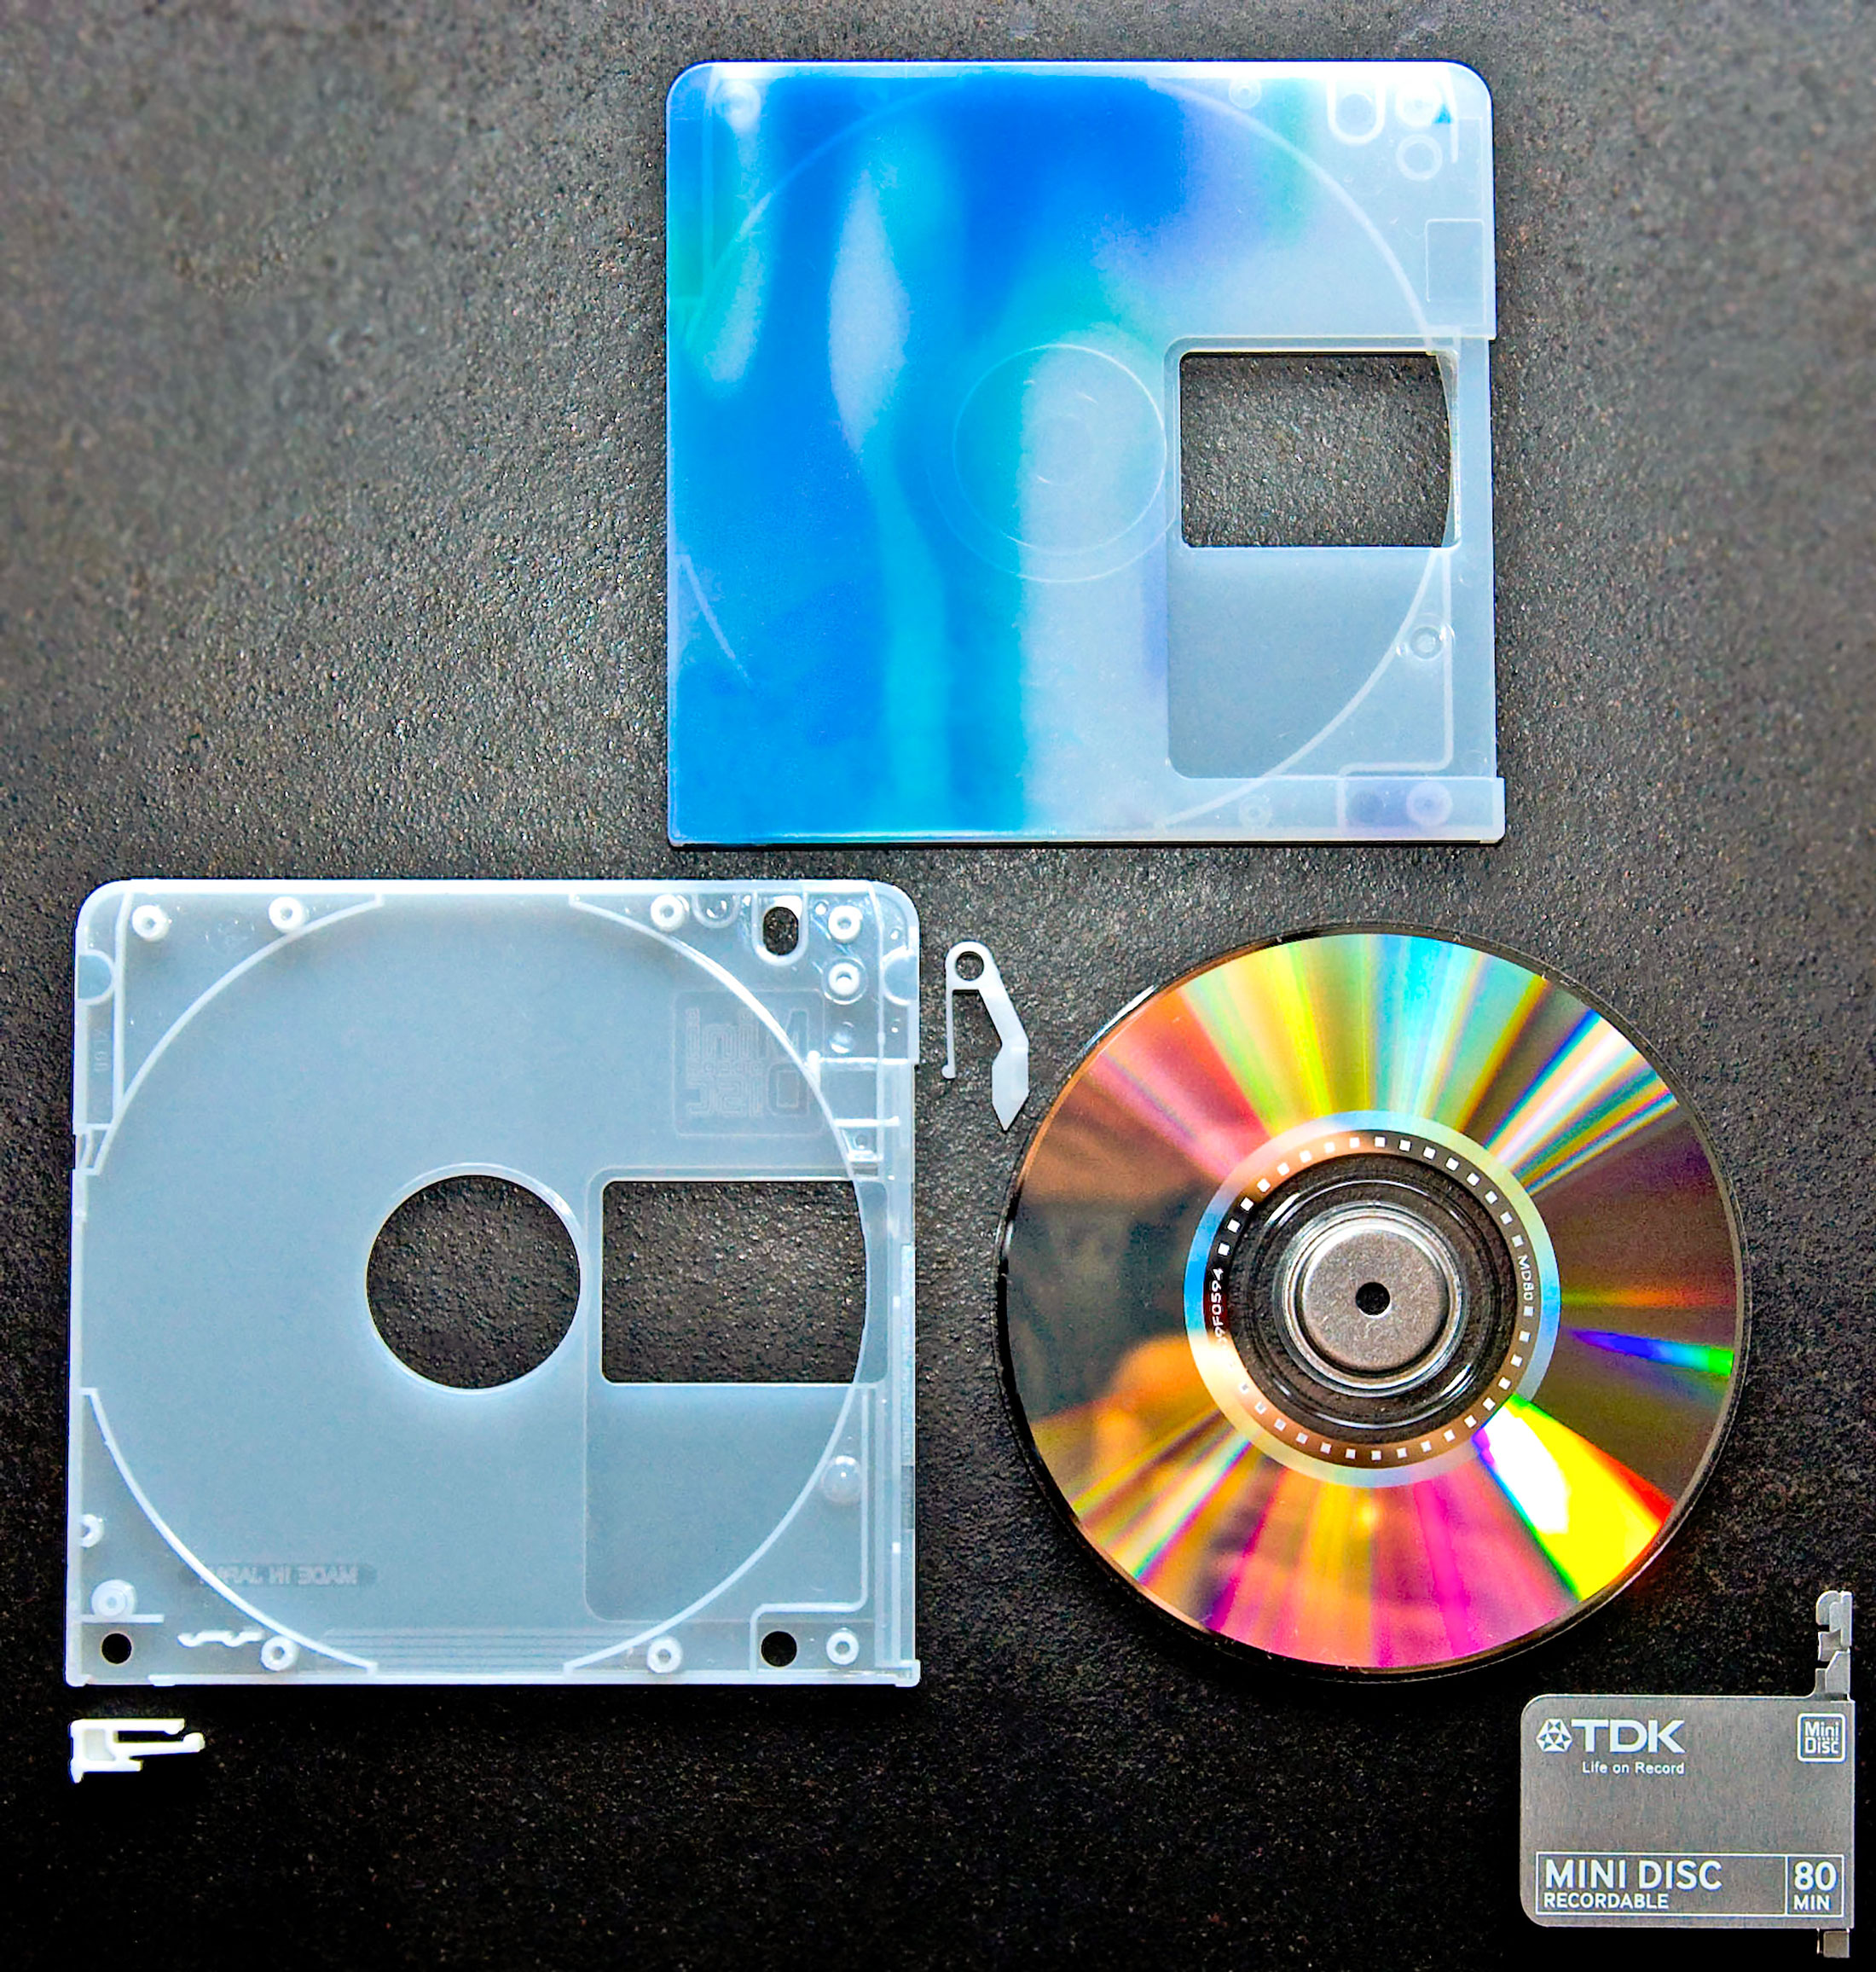 Photo of a minidisc that has been deconstructed. On the top shows the blue plastic outside covering. On the bottom left shows the inside white plastic container. To the bottom right, shows the actual round minidisc. Then below this is the metal slider, that protects the reading and writing of the mindisc.